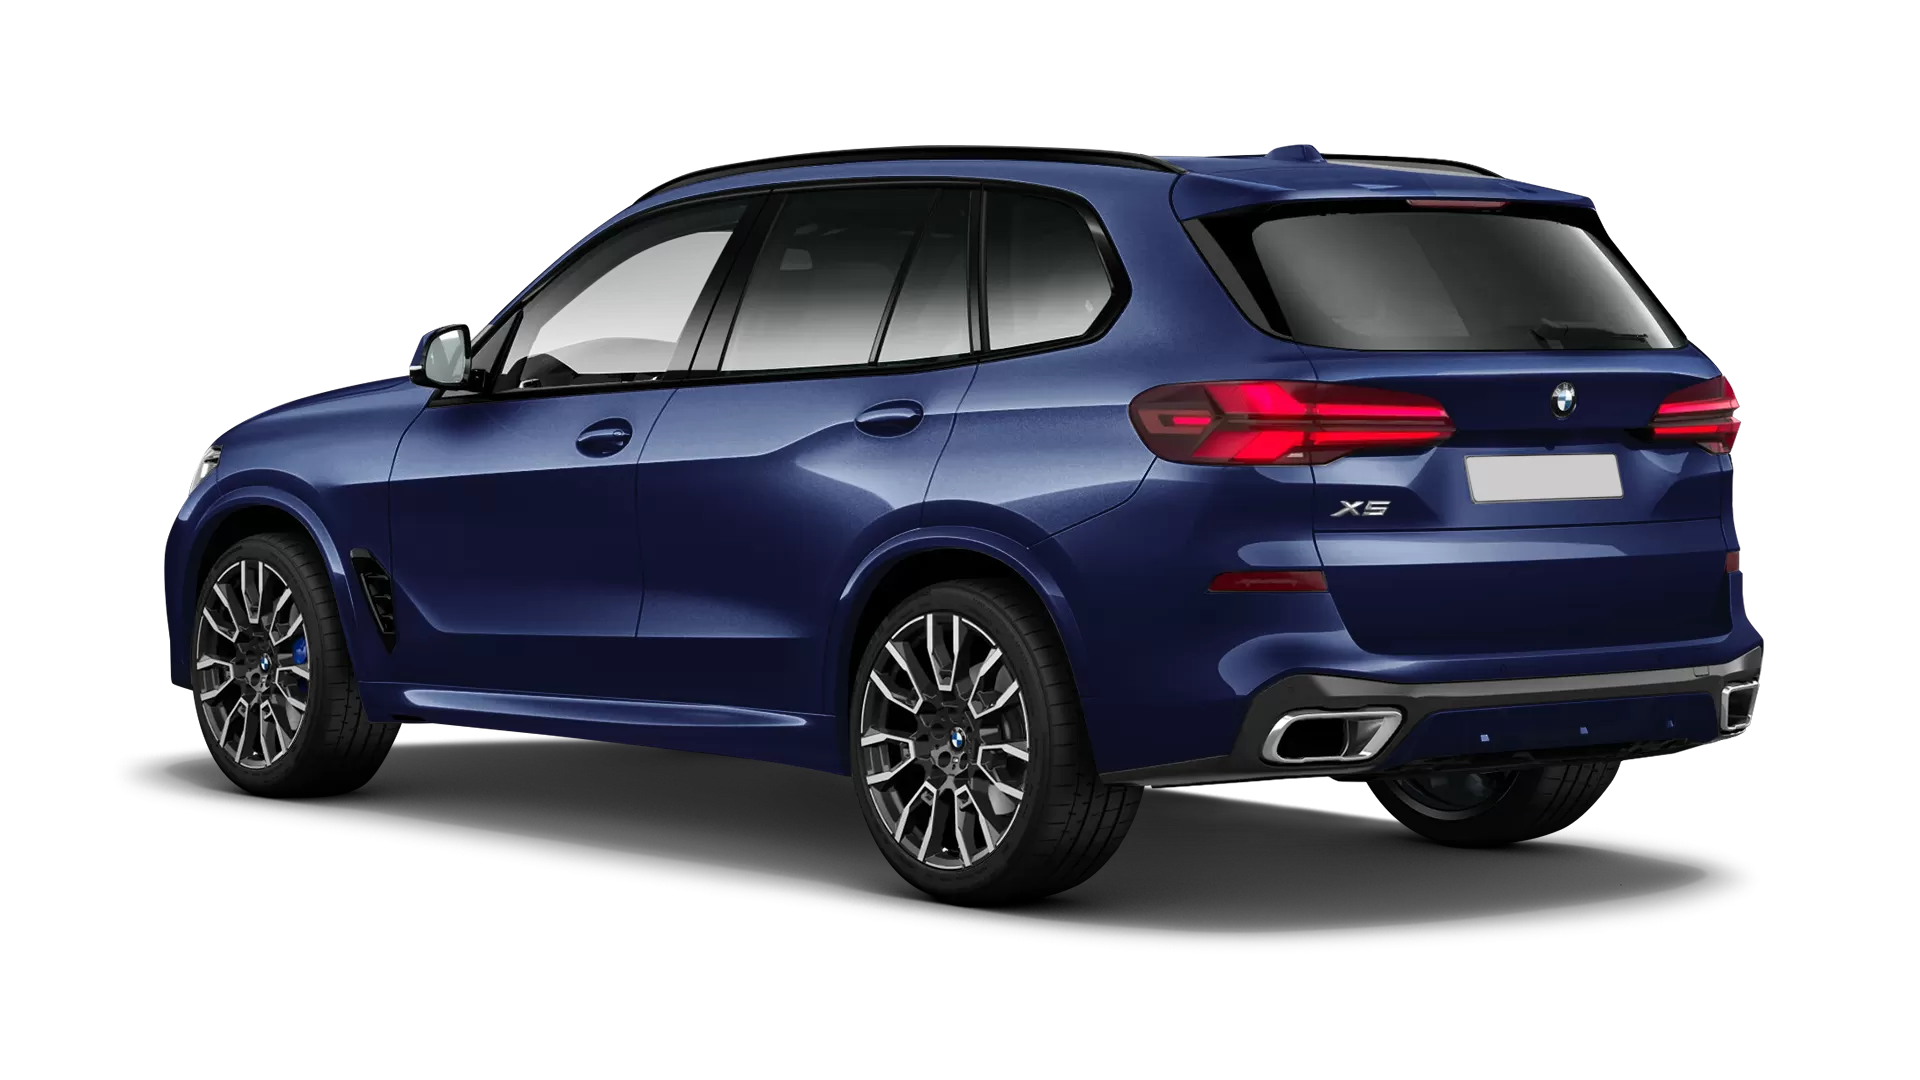 BMW X5 G05 LCI Facelift stock rear view in Tanzanite Blue color